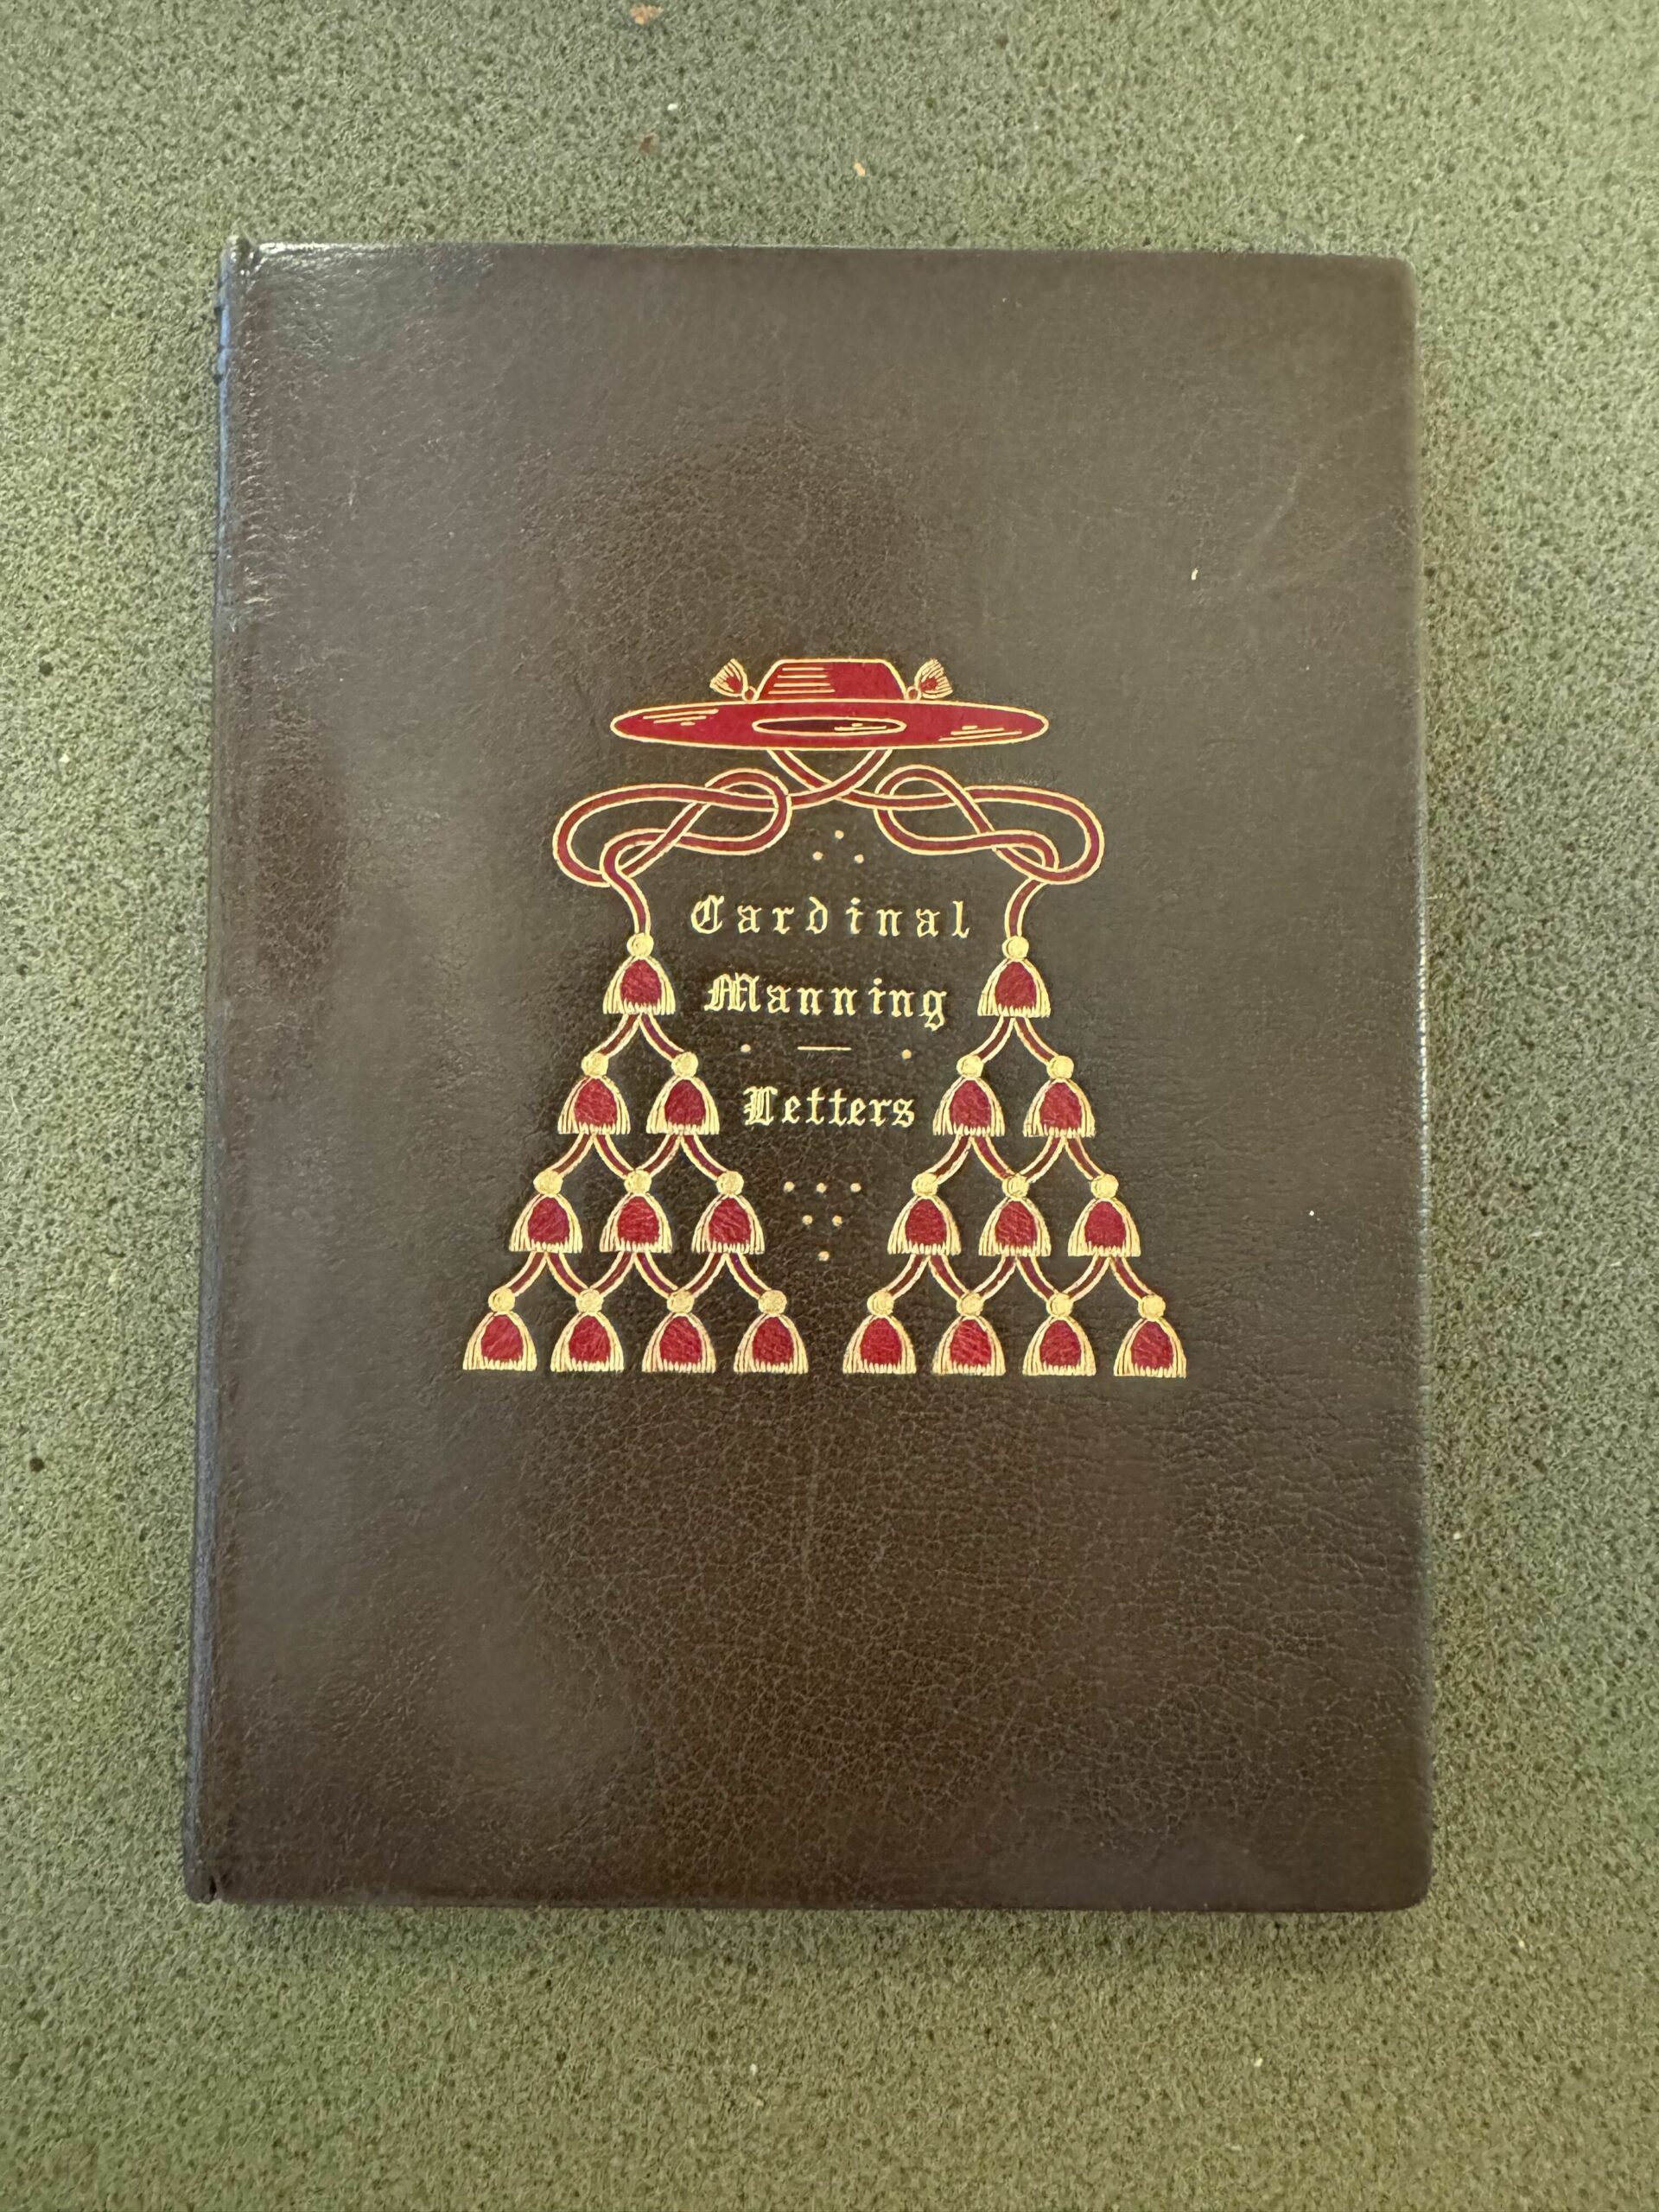 The cover of the Manning volume